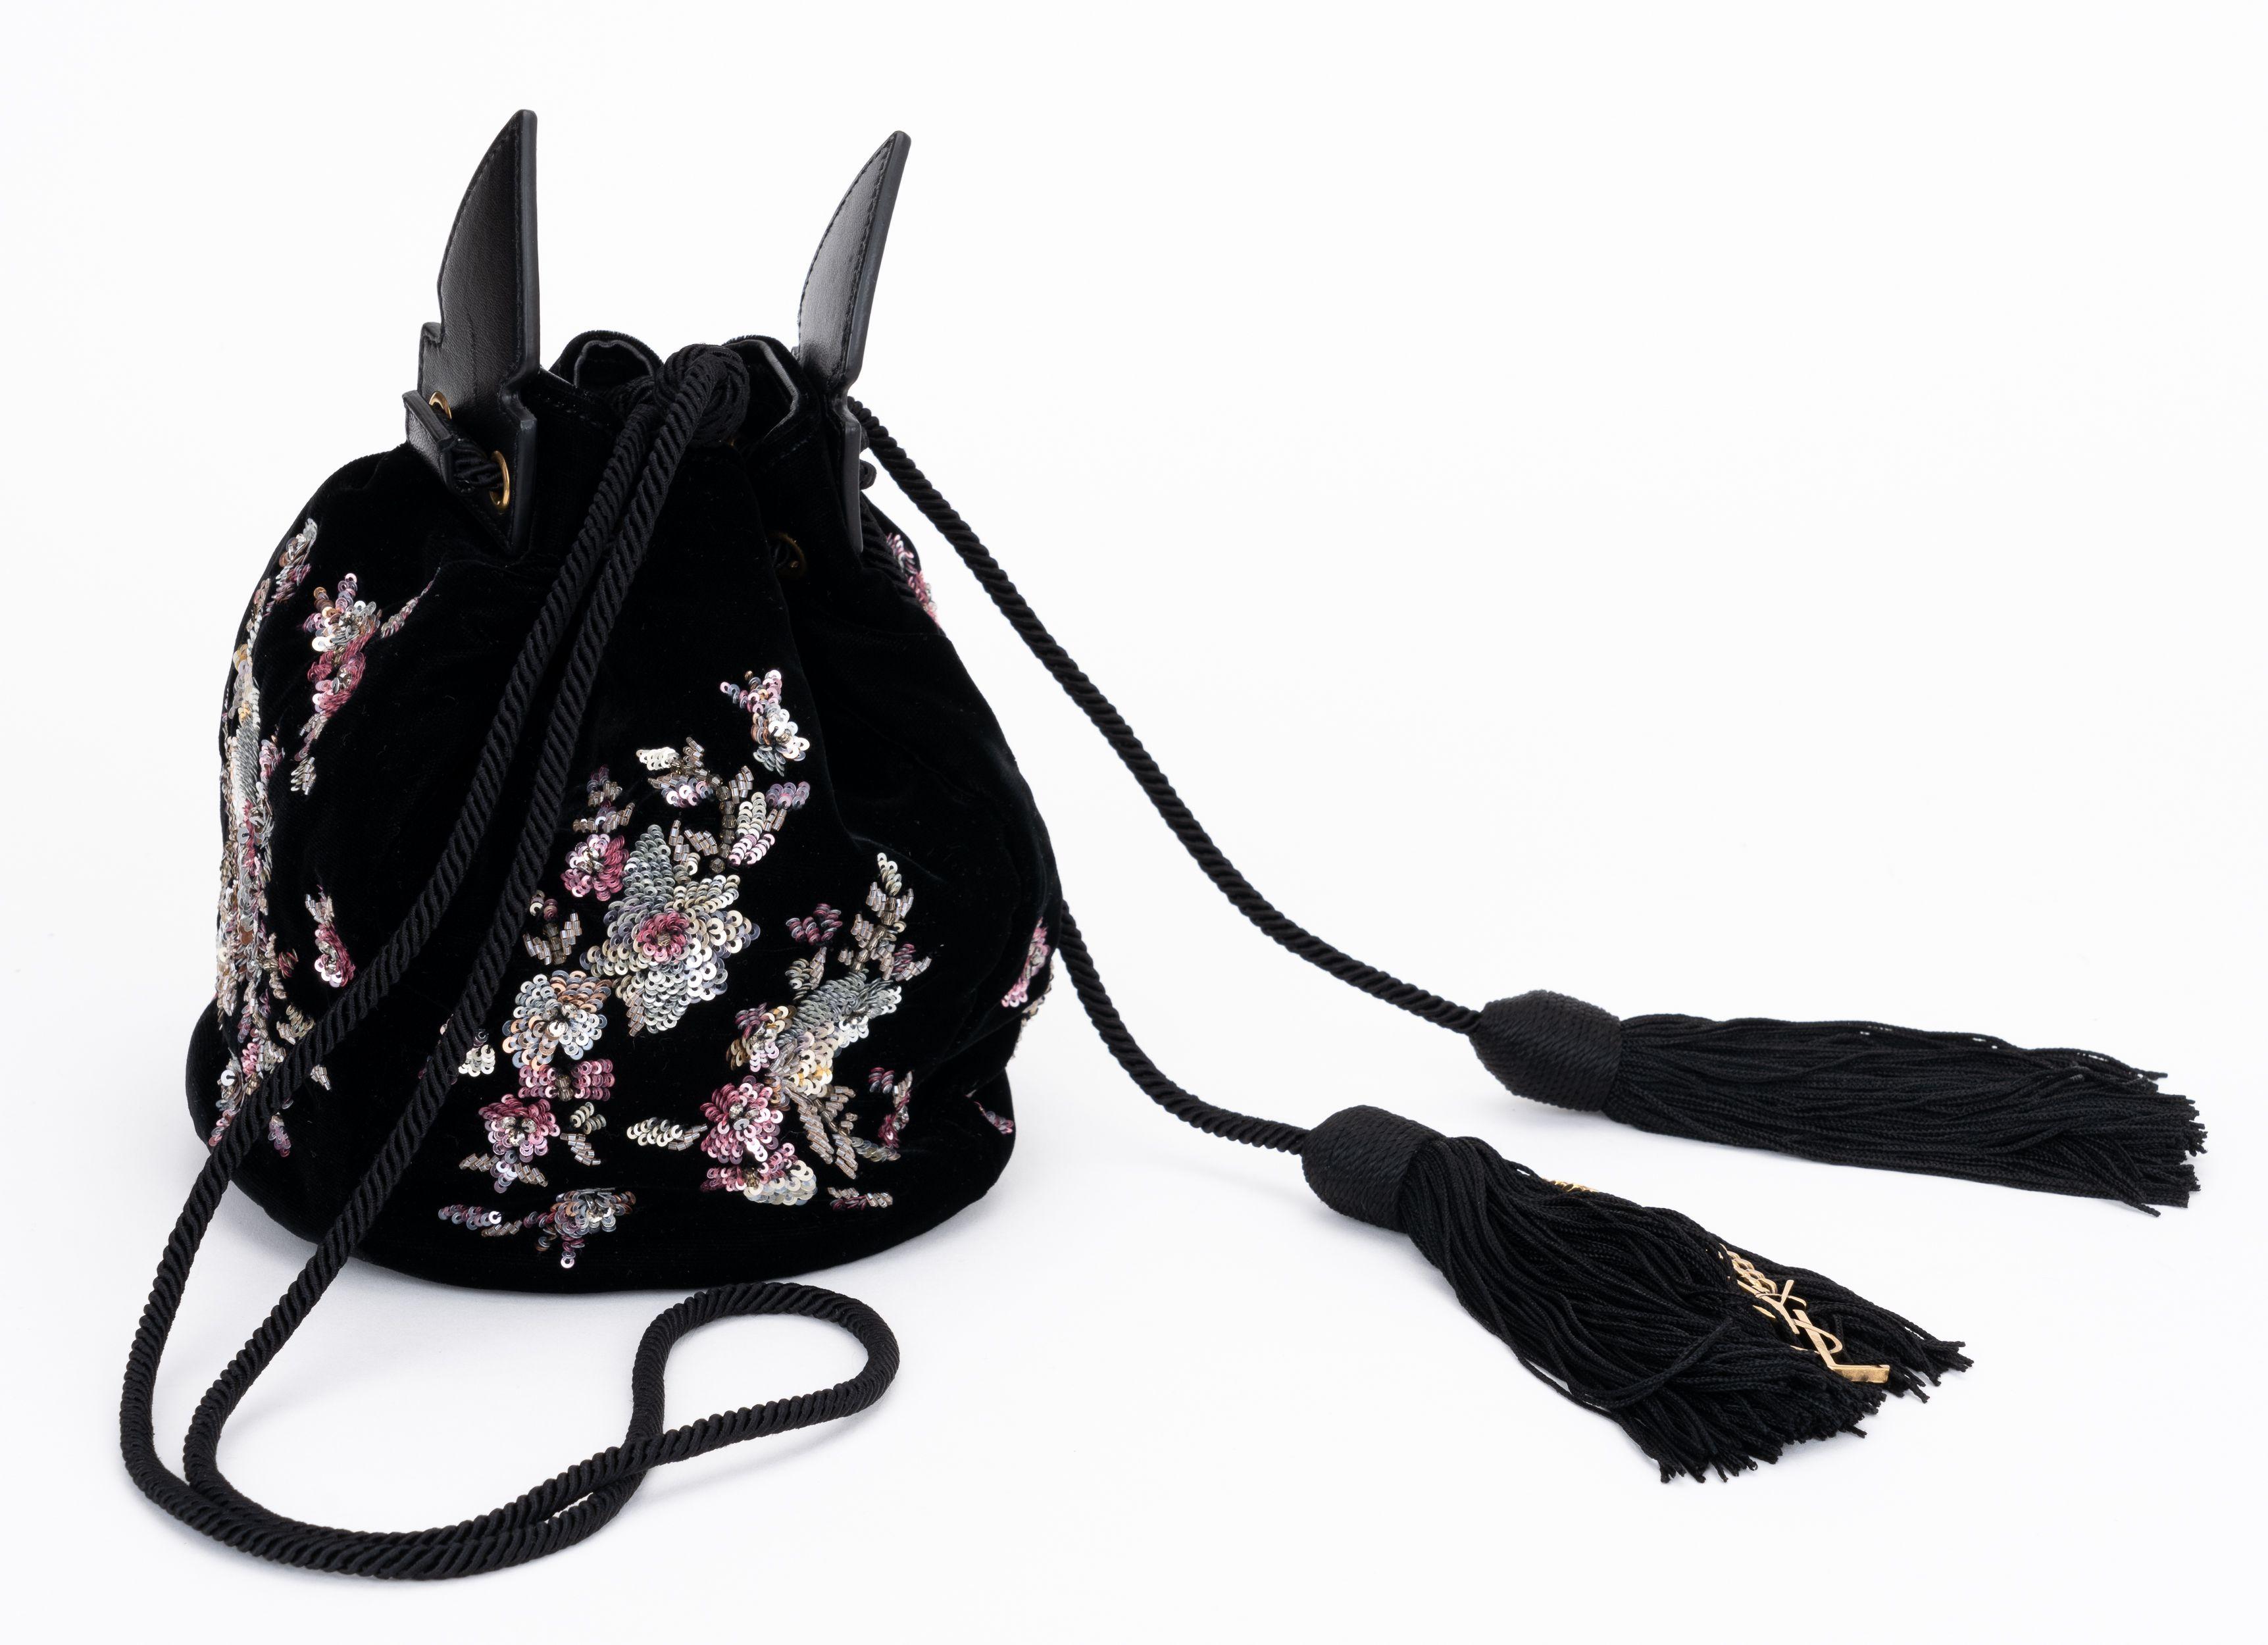 YSL new in unused condition black velvet bucket bag. Embroidered exterior and black leather lining interior. Silk tassels with antique gold chains and logo. 
Shoulder drop 21